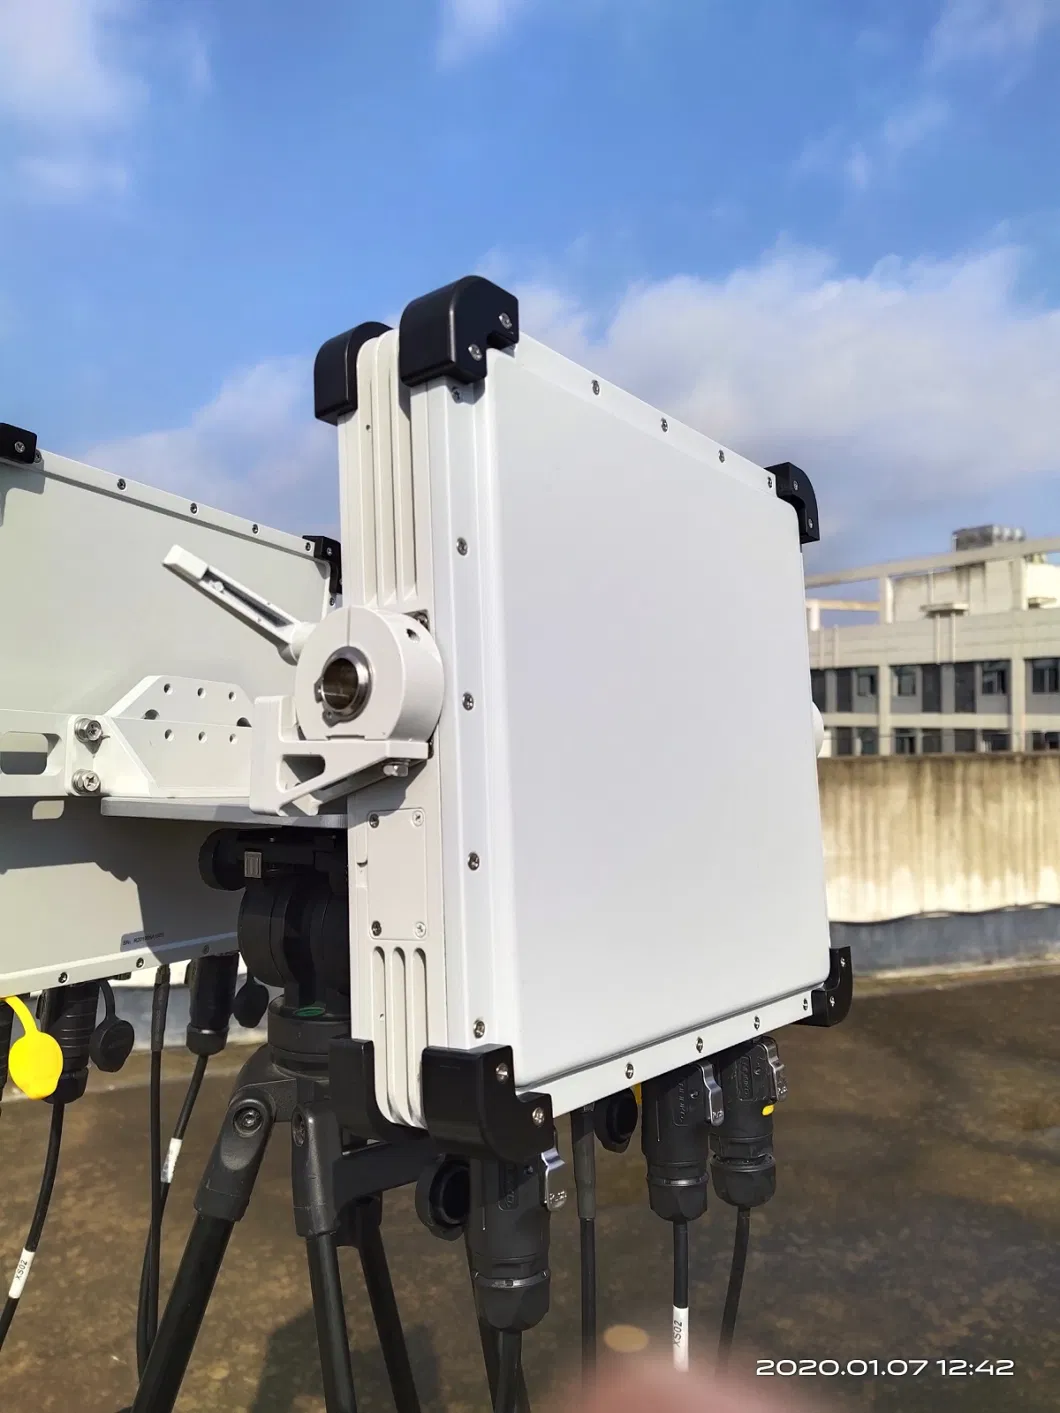 Ground and Coastal Surveillance Radar to Deliver Best-in-Class Target Detection and Acquisition Performance